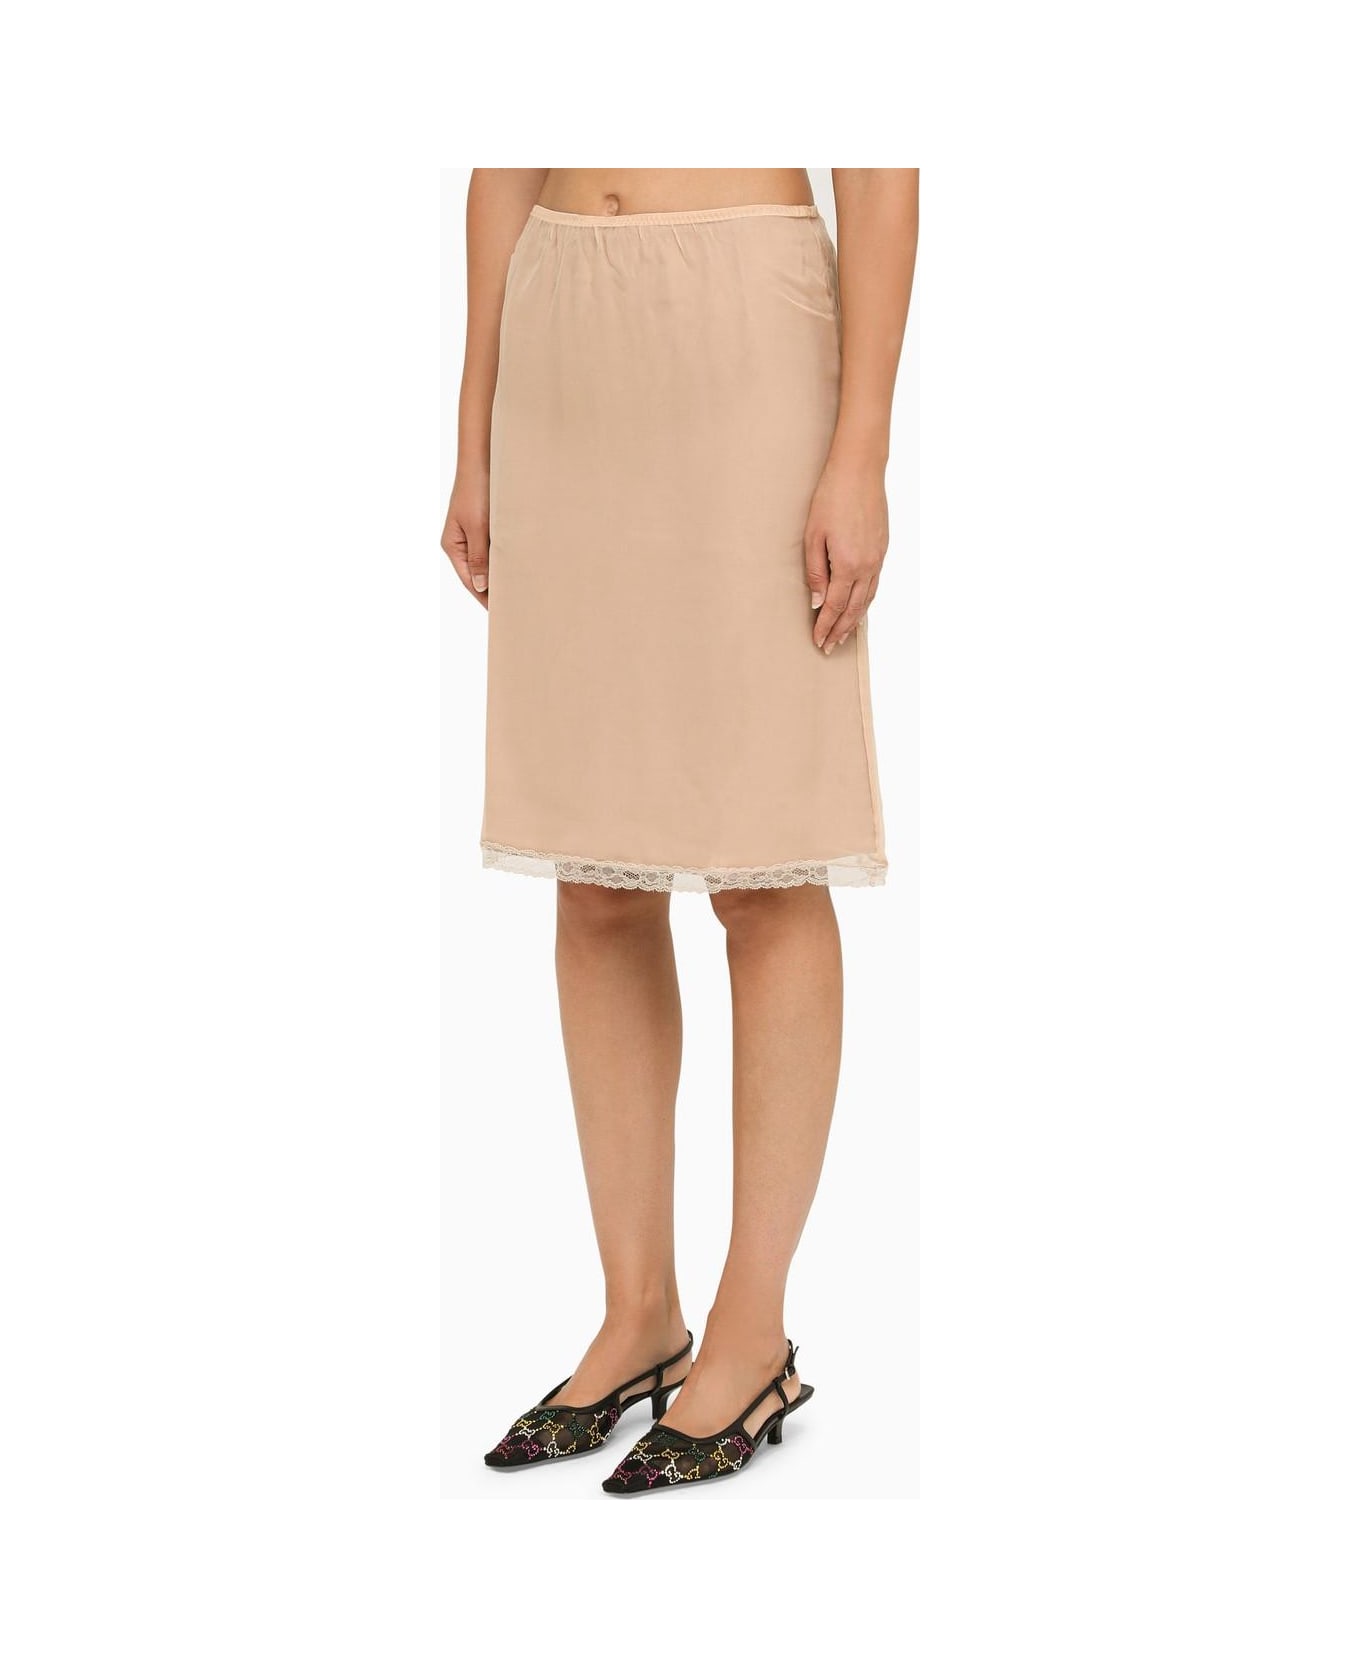 Gucci Nude Acetate Skirt With Lace - Powder